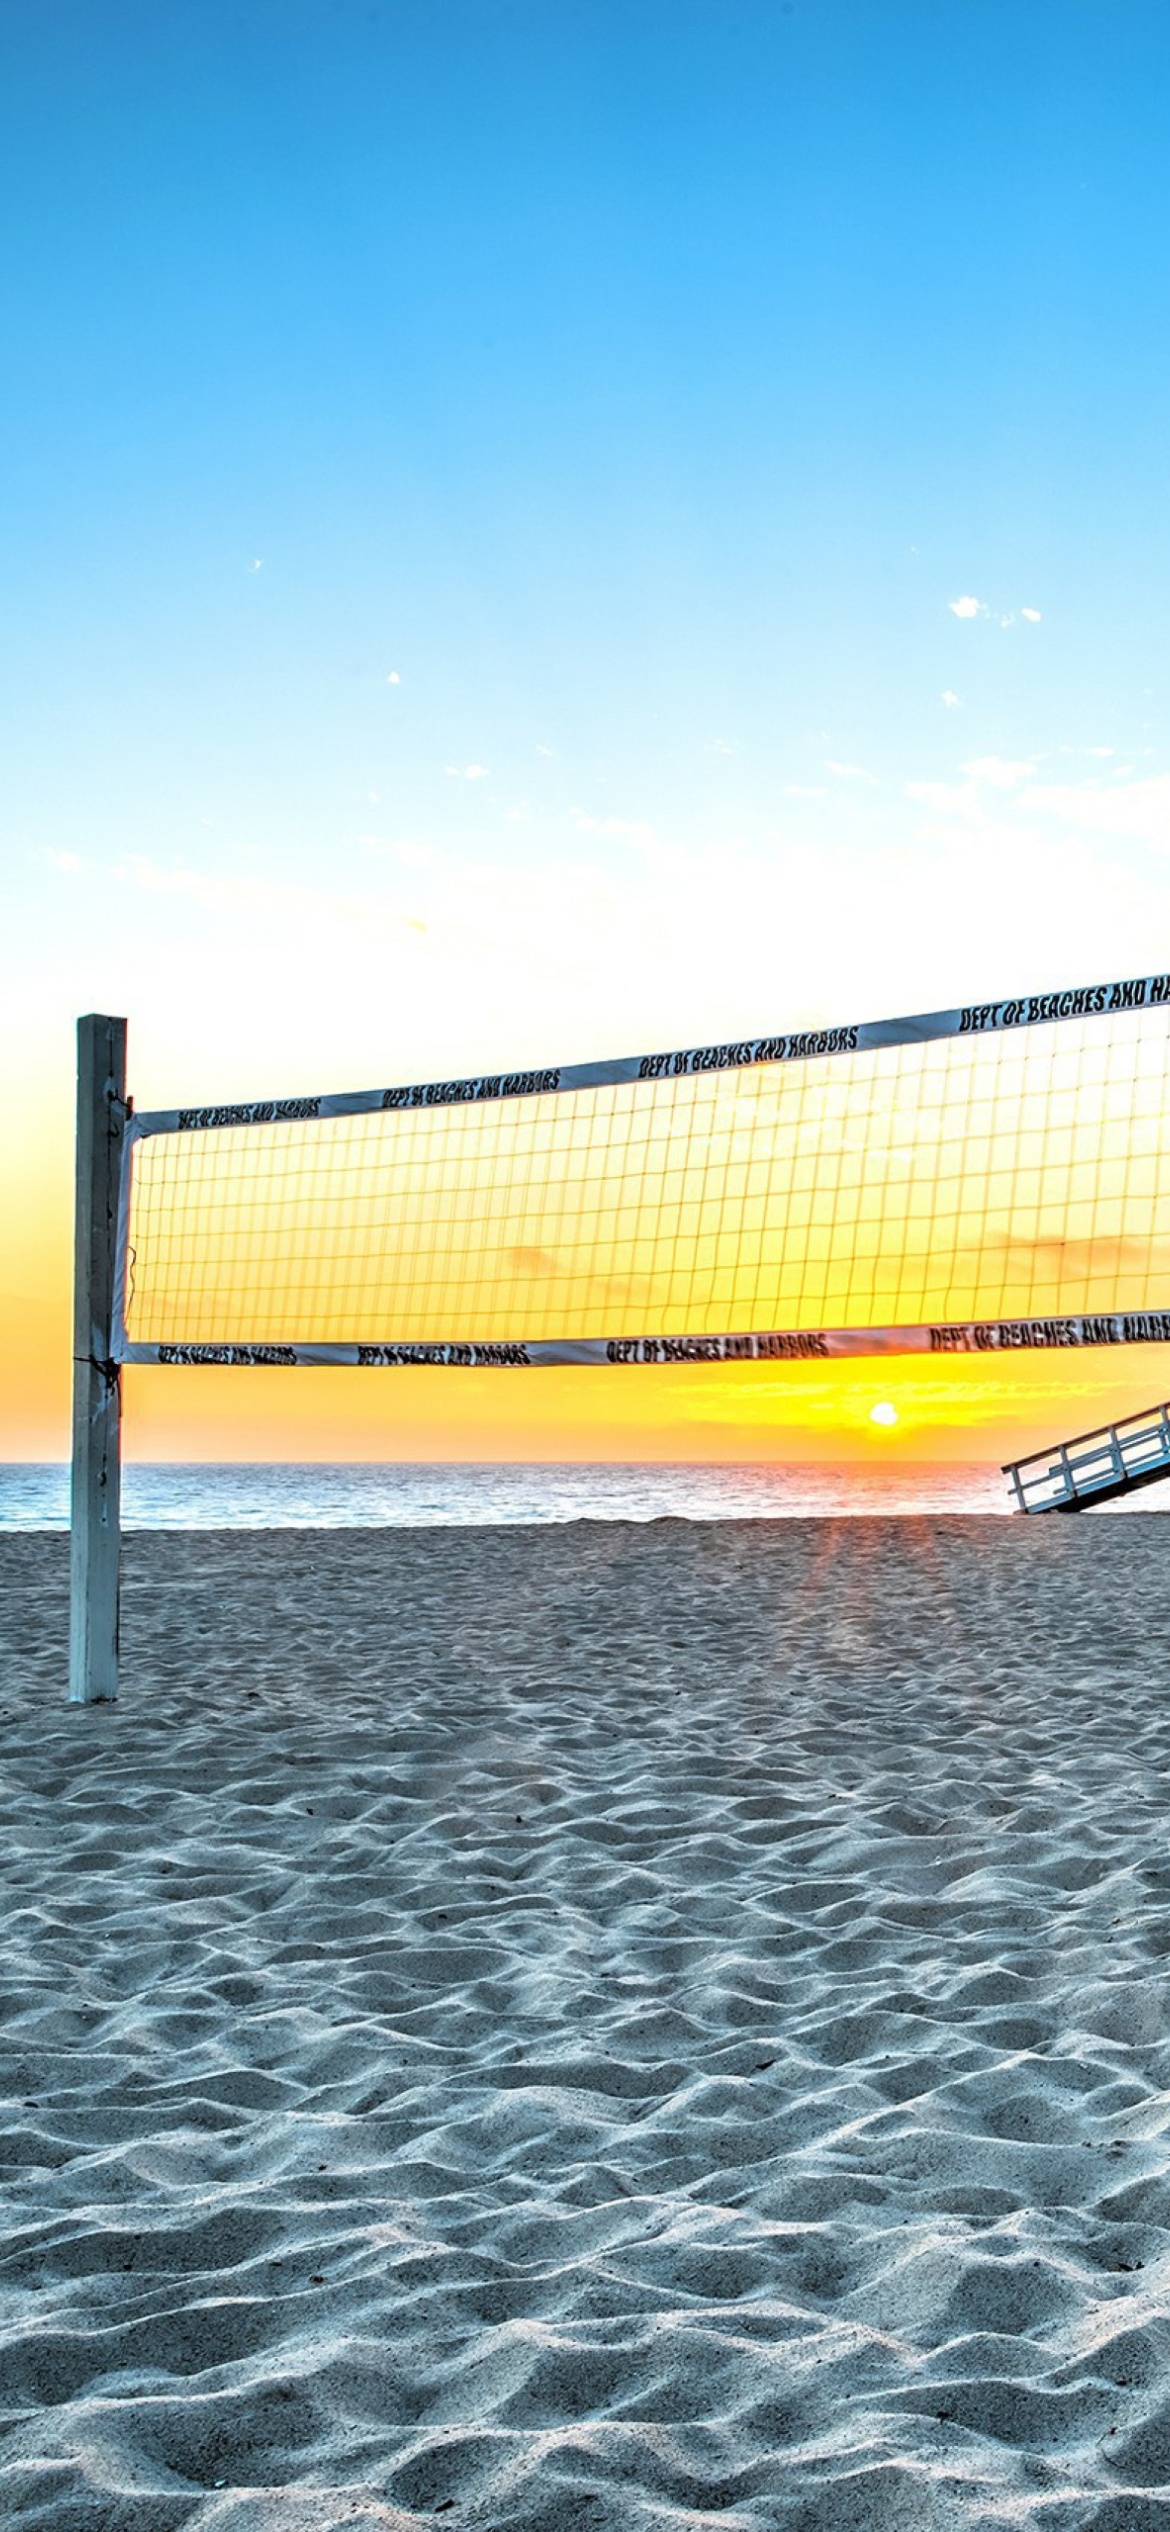 Volleyball HD Wallpapers 1000 Free Volleyball Wallpaper Images For All  Devices